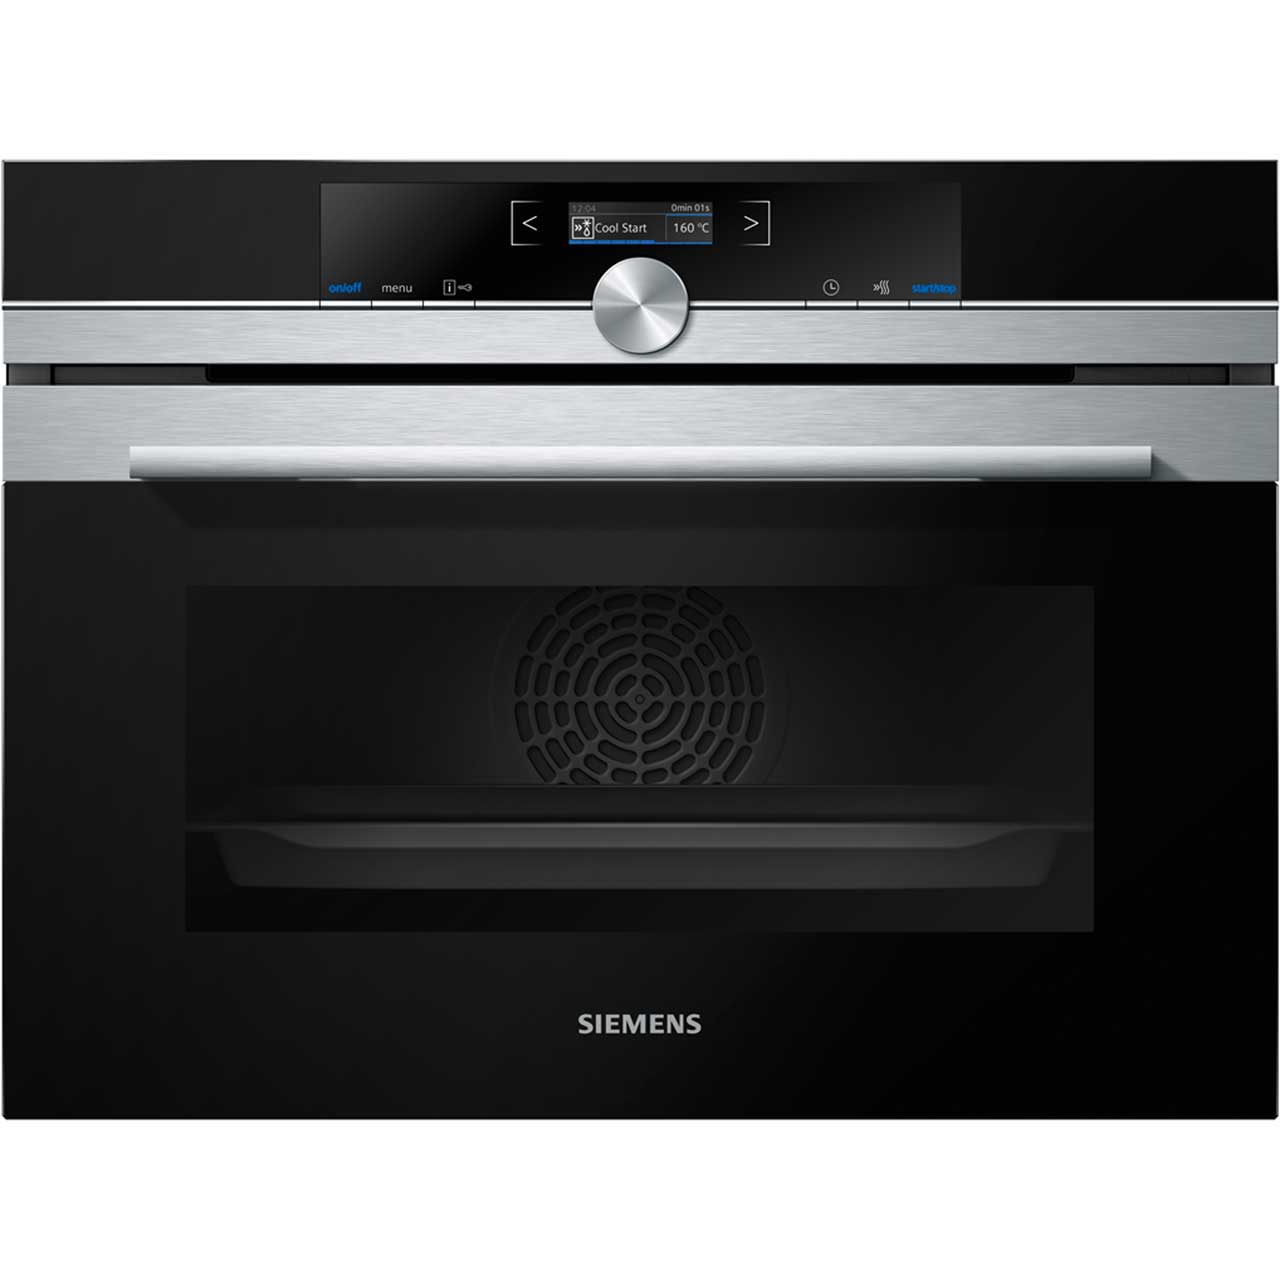 Siemens IQ-700 CB675GBS1B Integrated Single Oven in Stainless Steel